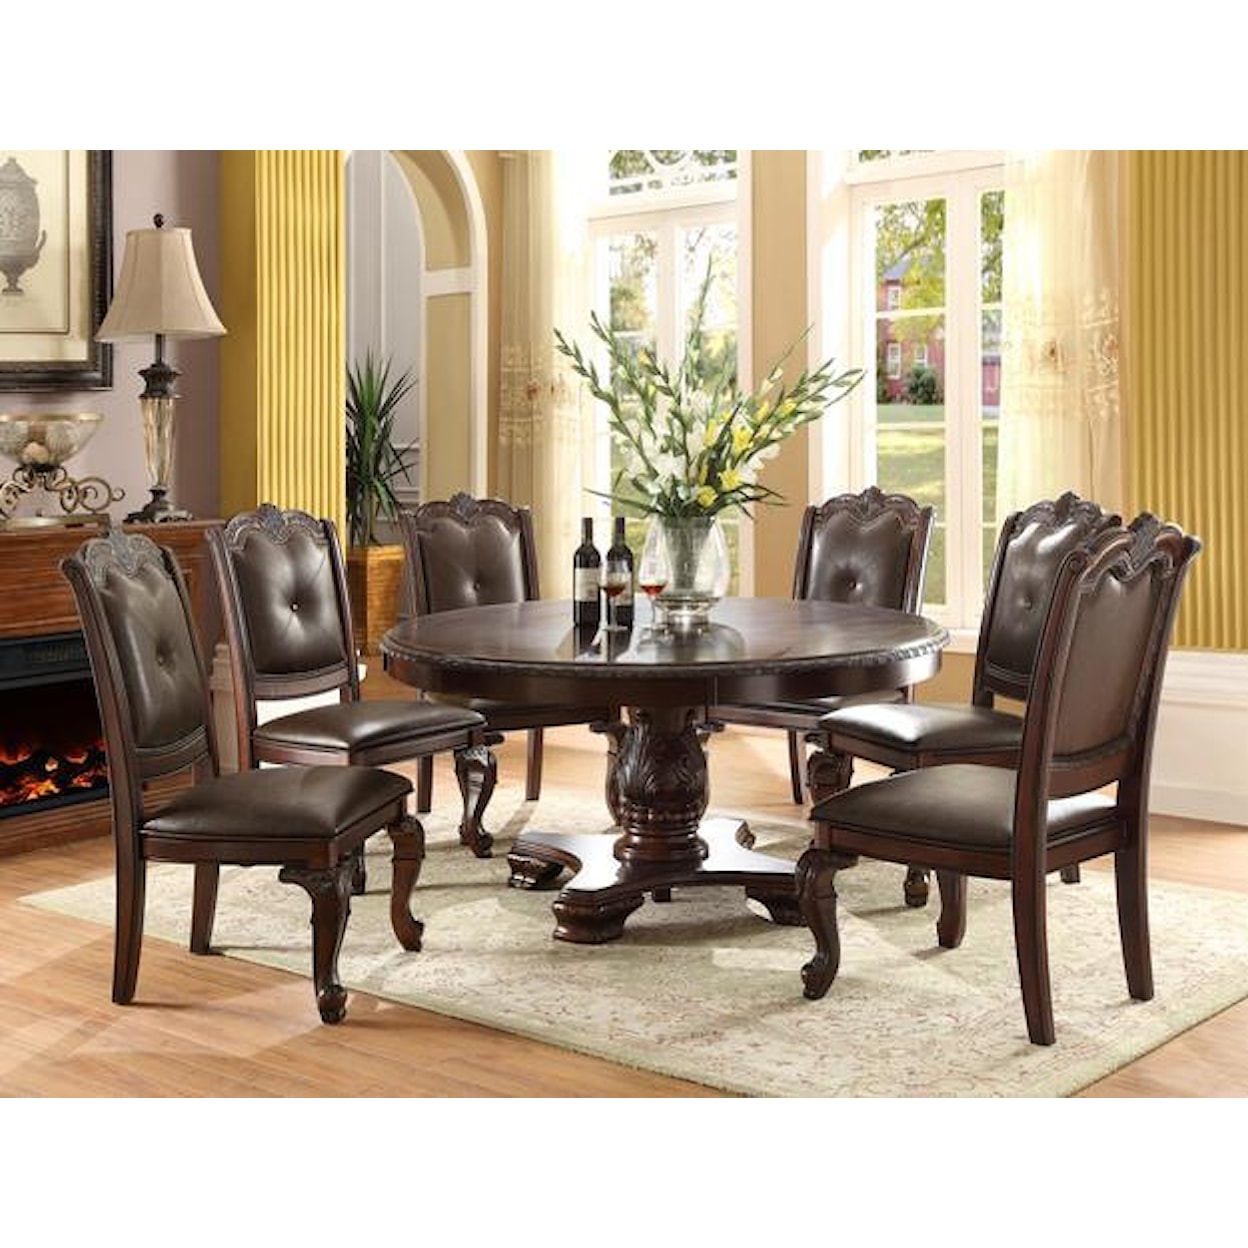 CM Kiera Round Table with Six Chairs